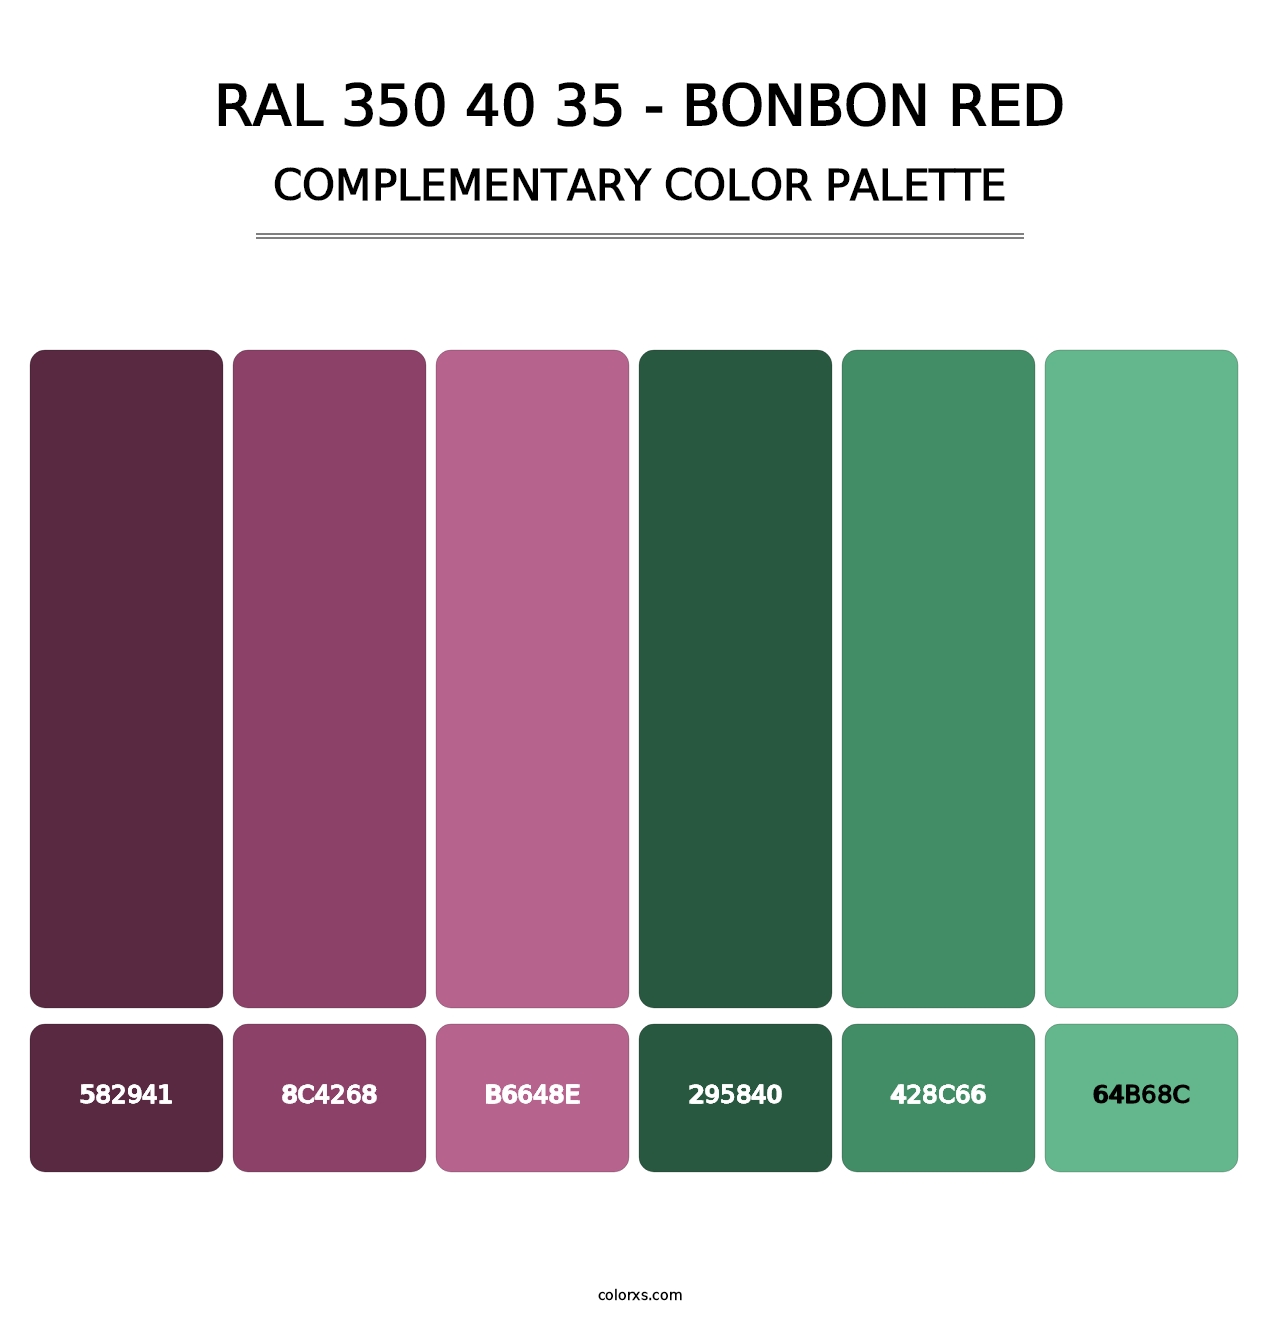 RAL 350 40 35 - Bonbon Red - Complementary Color Palette